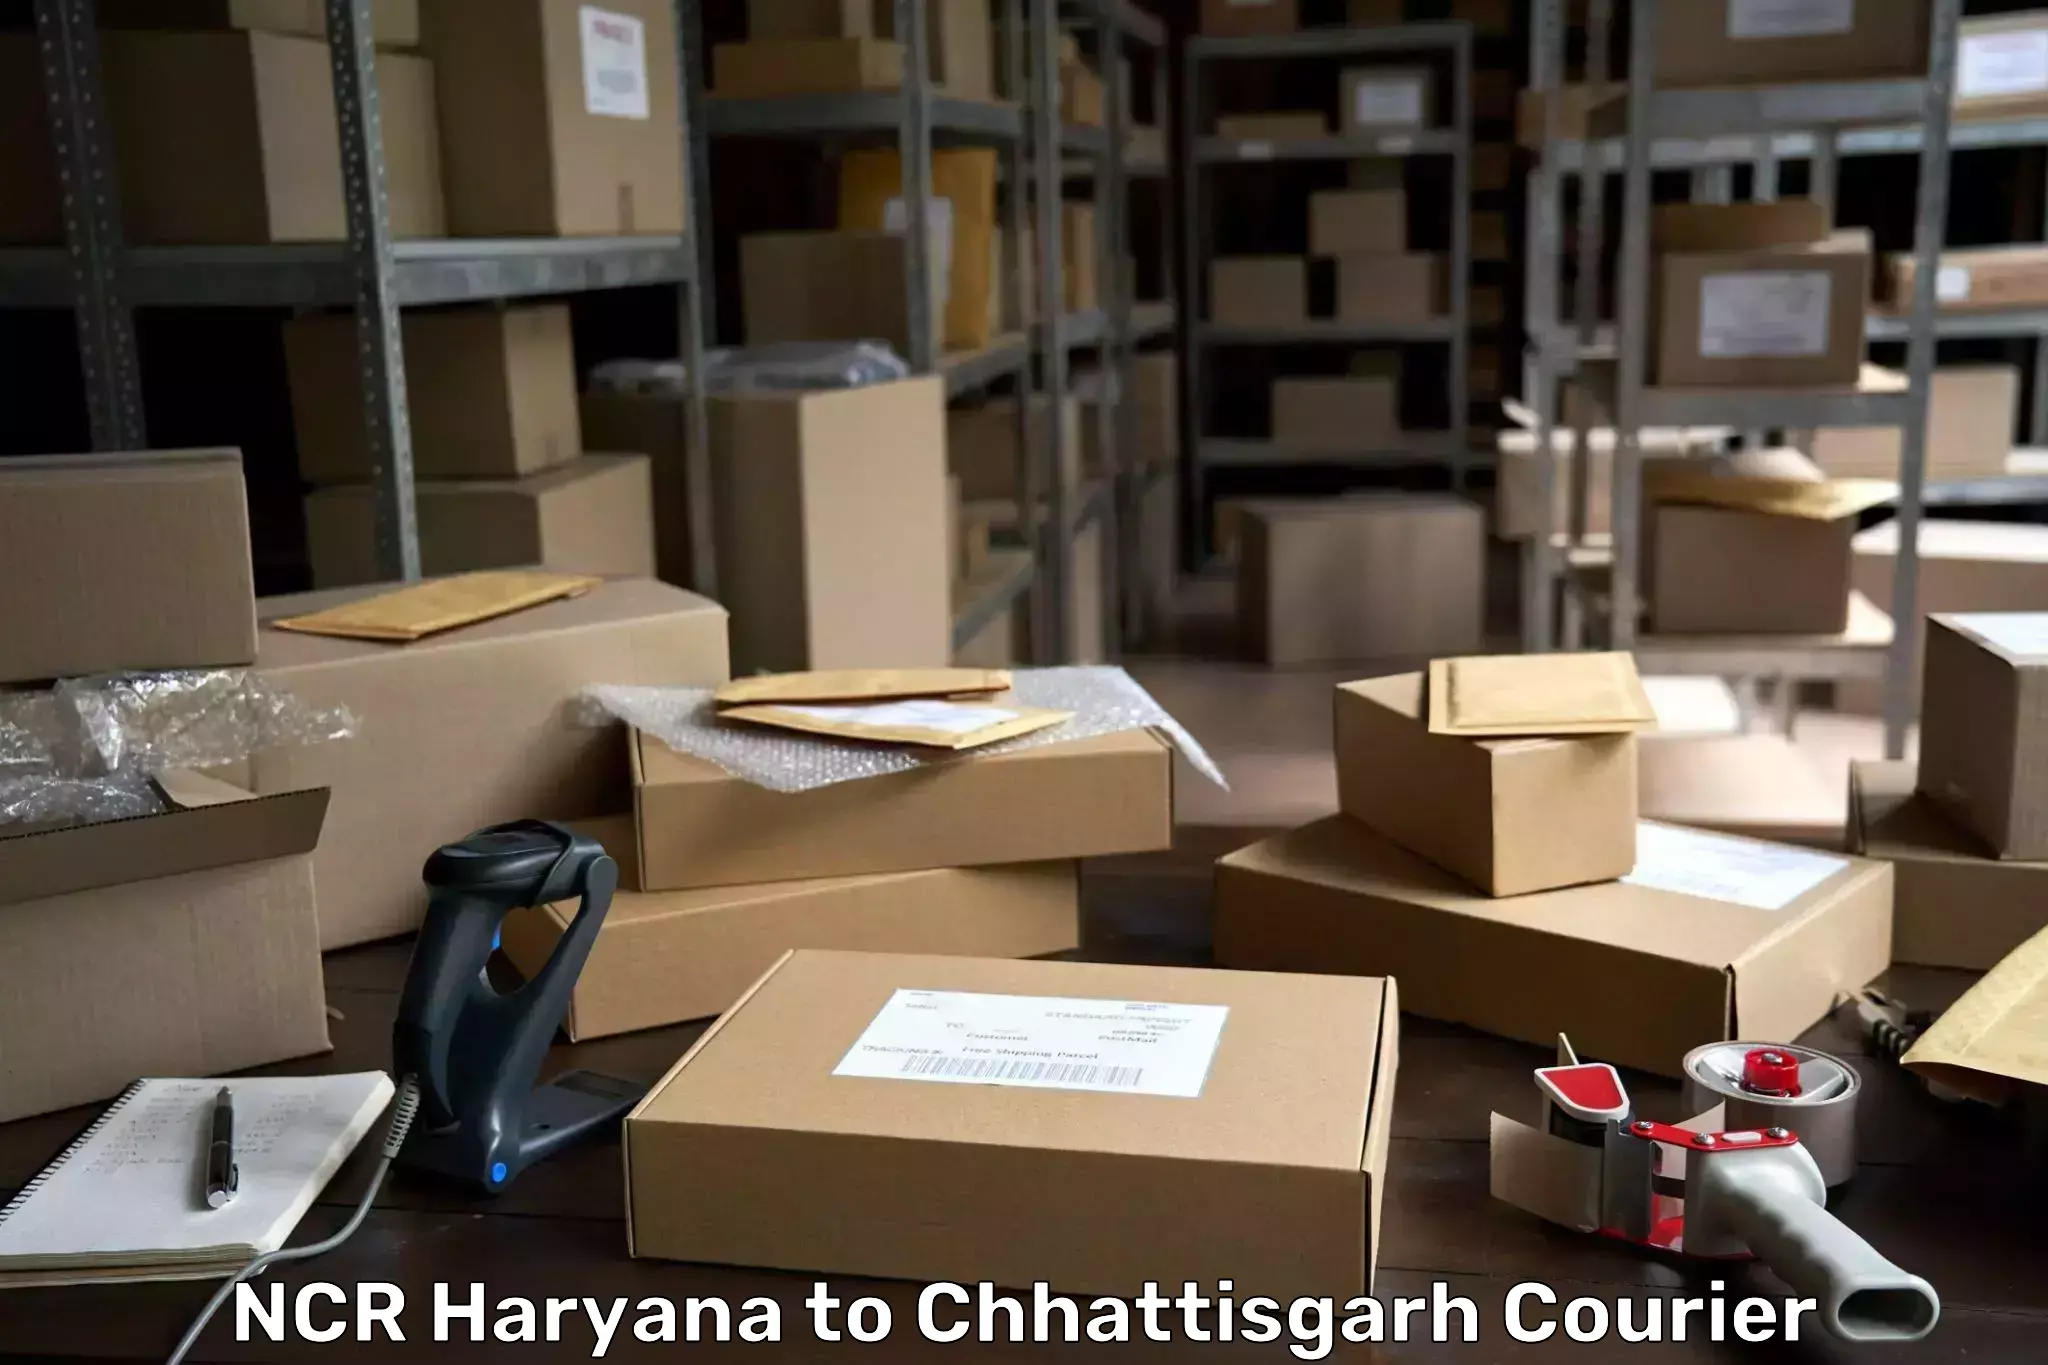 Reliable courier service in NCR Haryana to Chhattisgarh